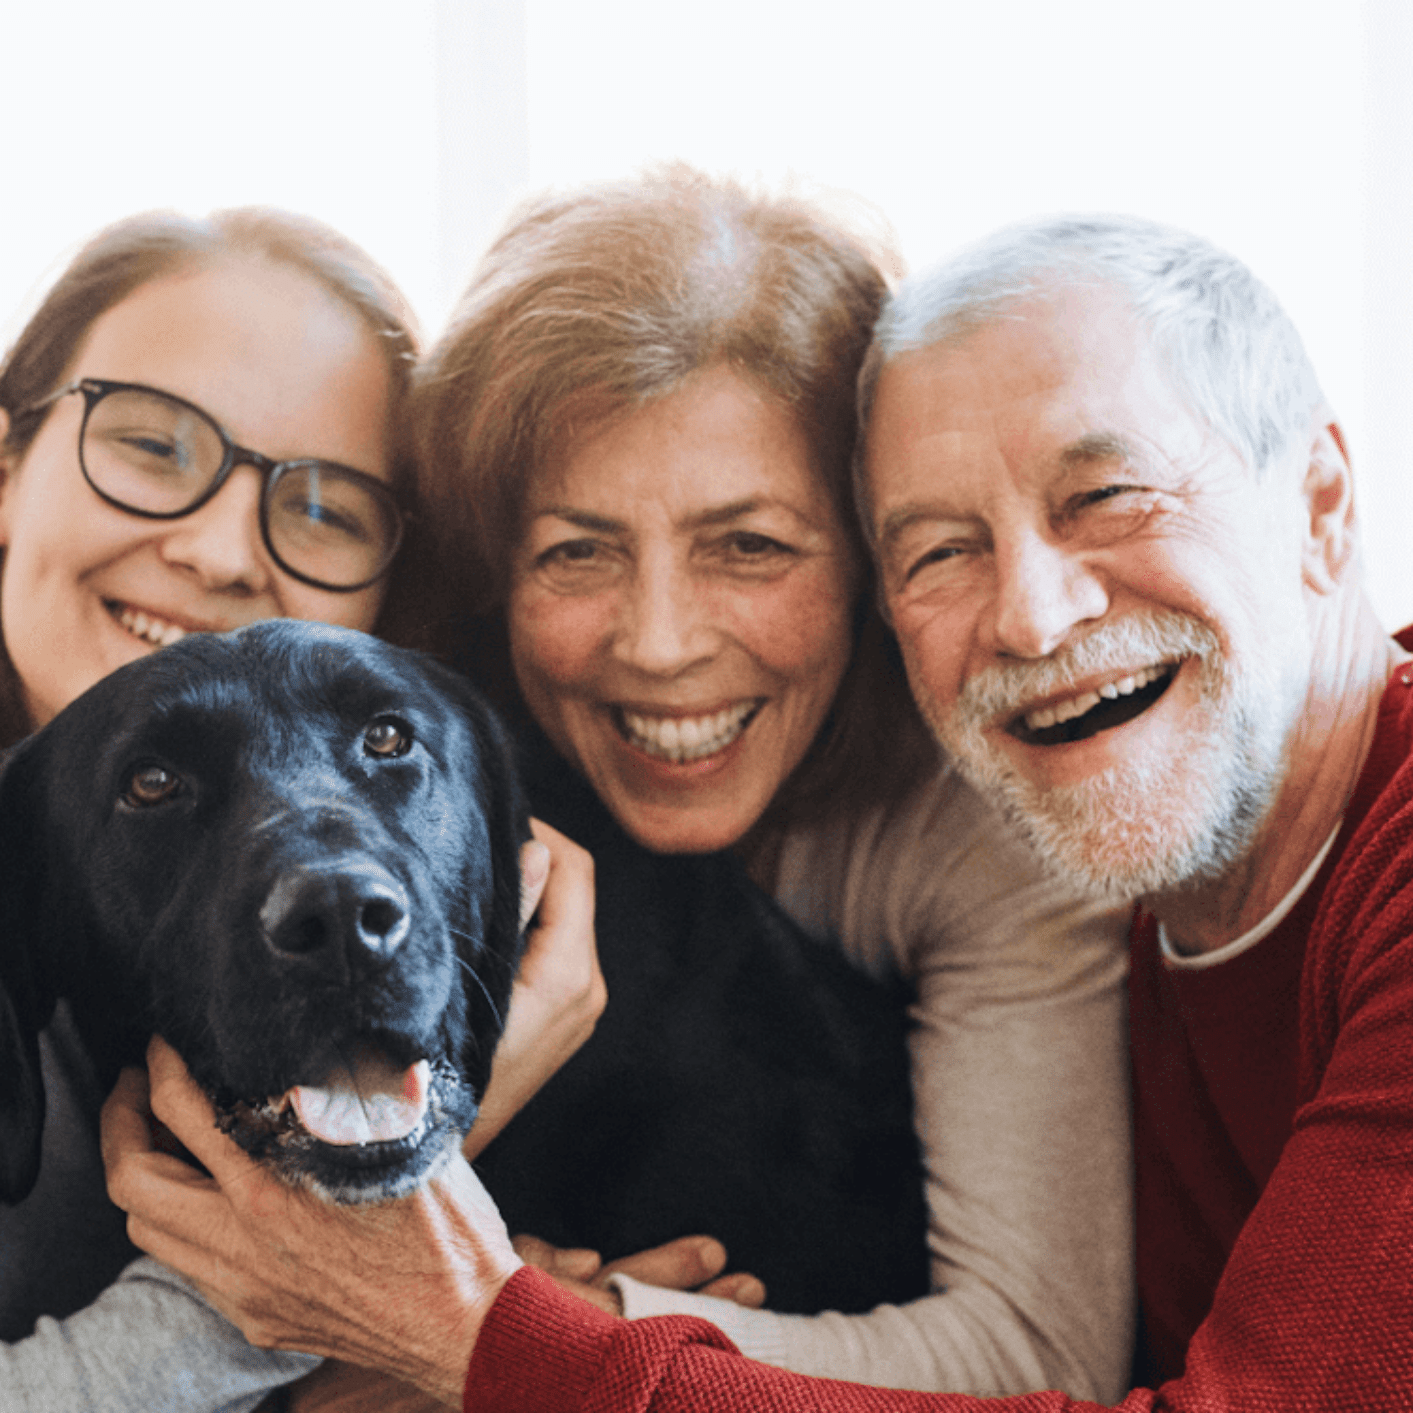 A family and a dog smiling together